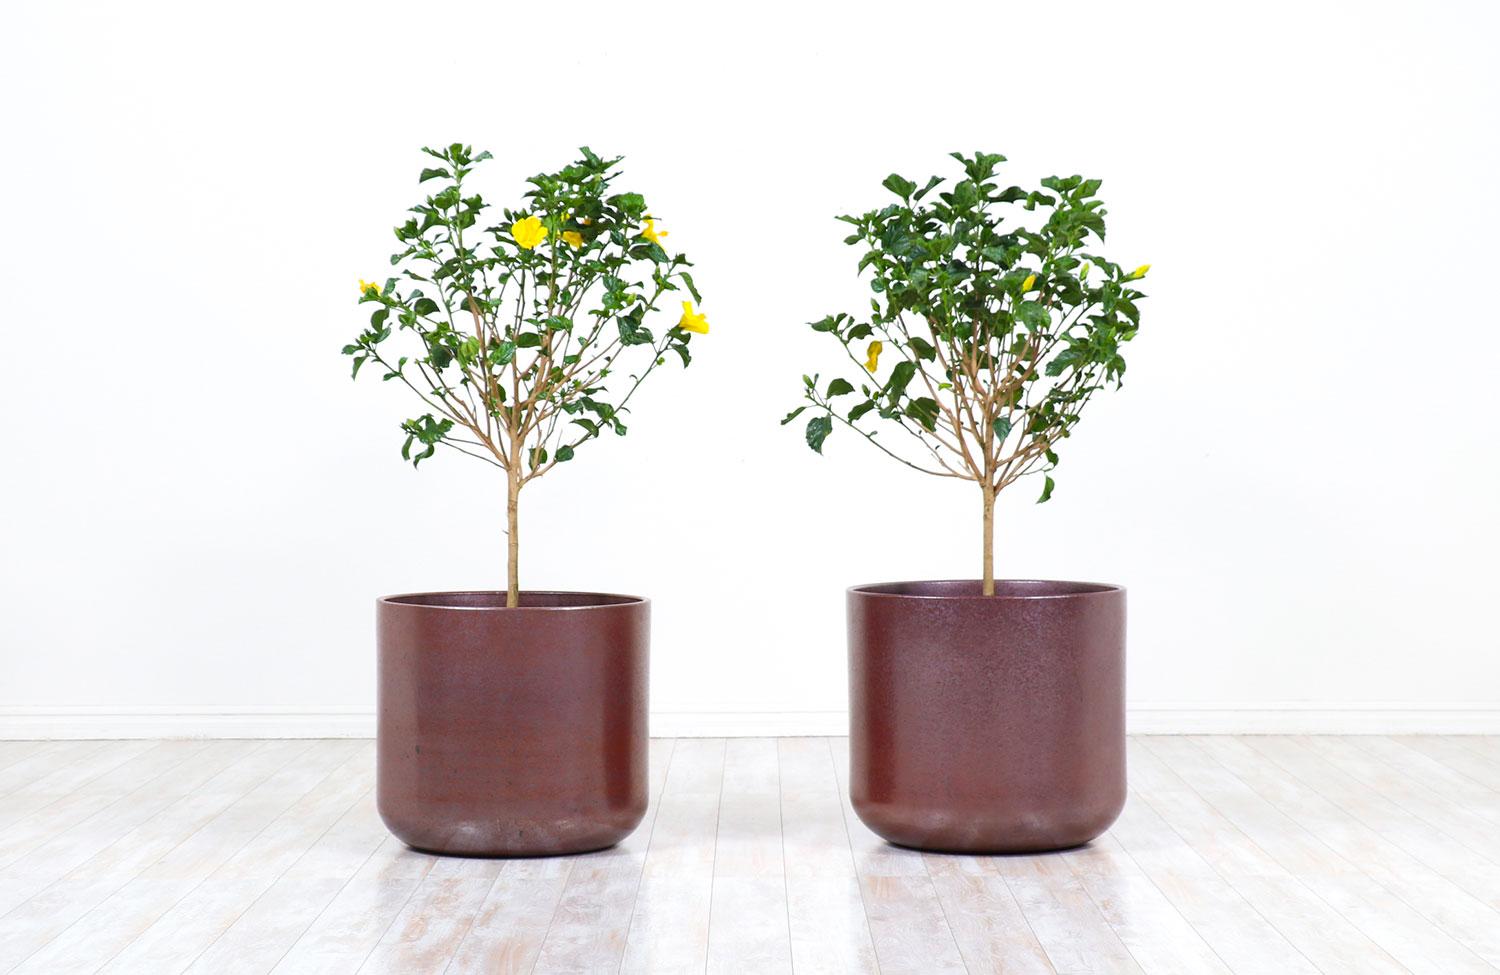 Price is for each. Large Malcolm Leland & David Cressey Studio planters with pro artisan stoneware & rust glaze.